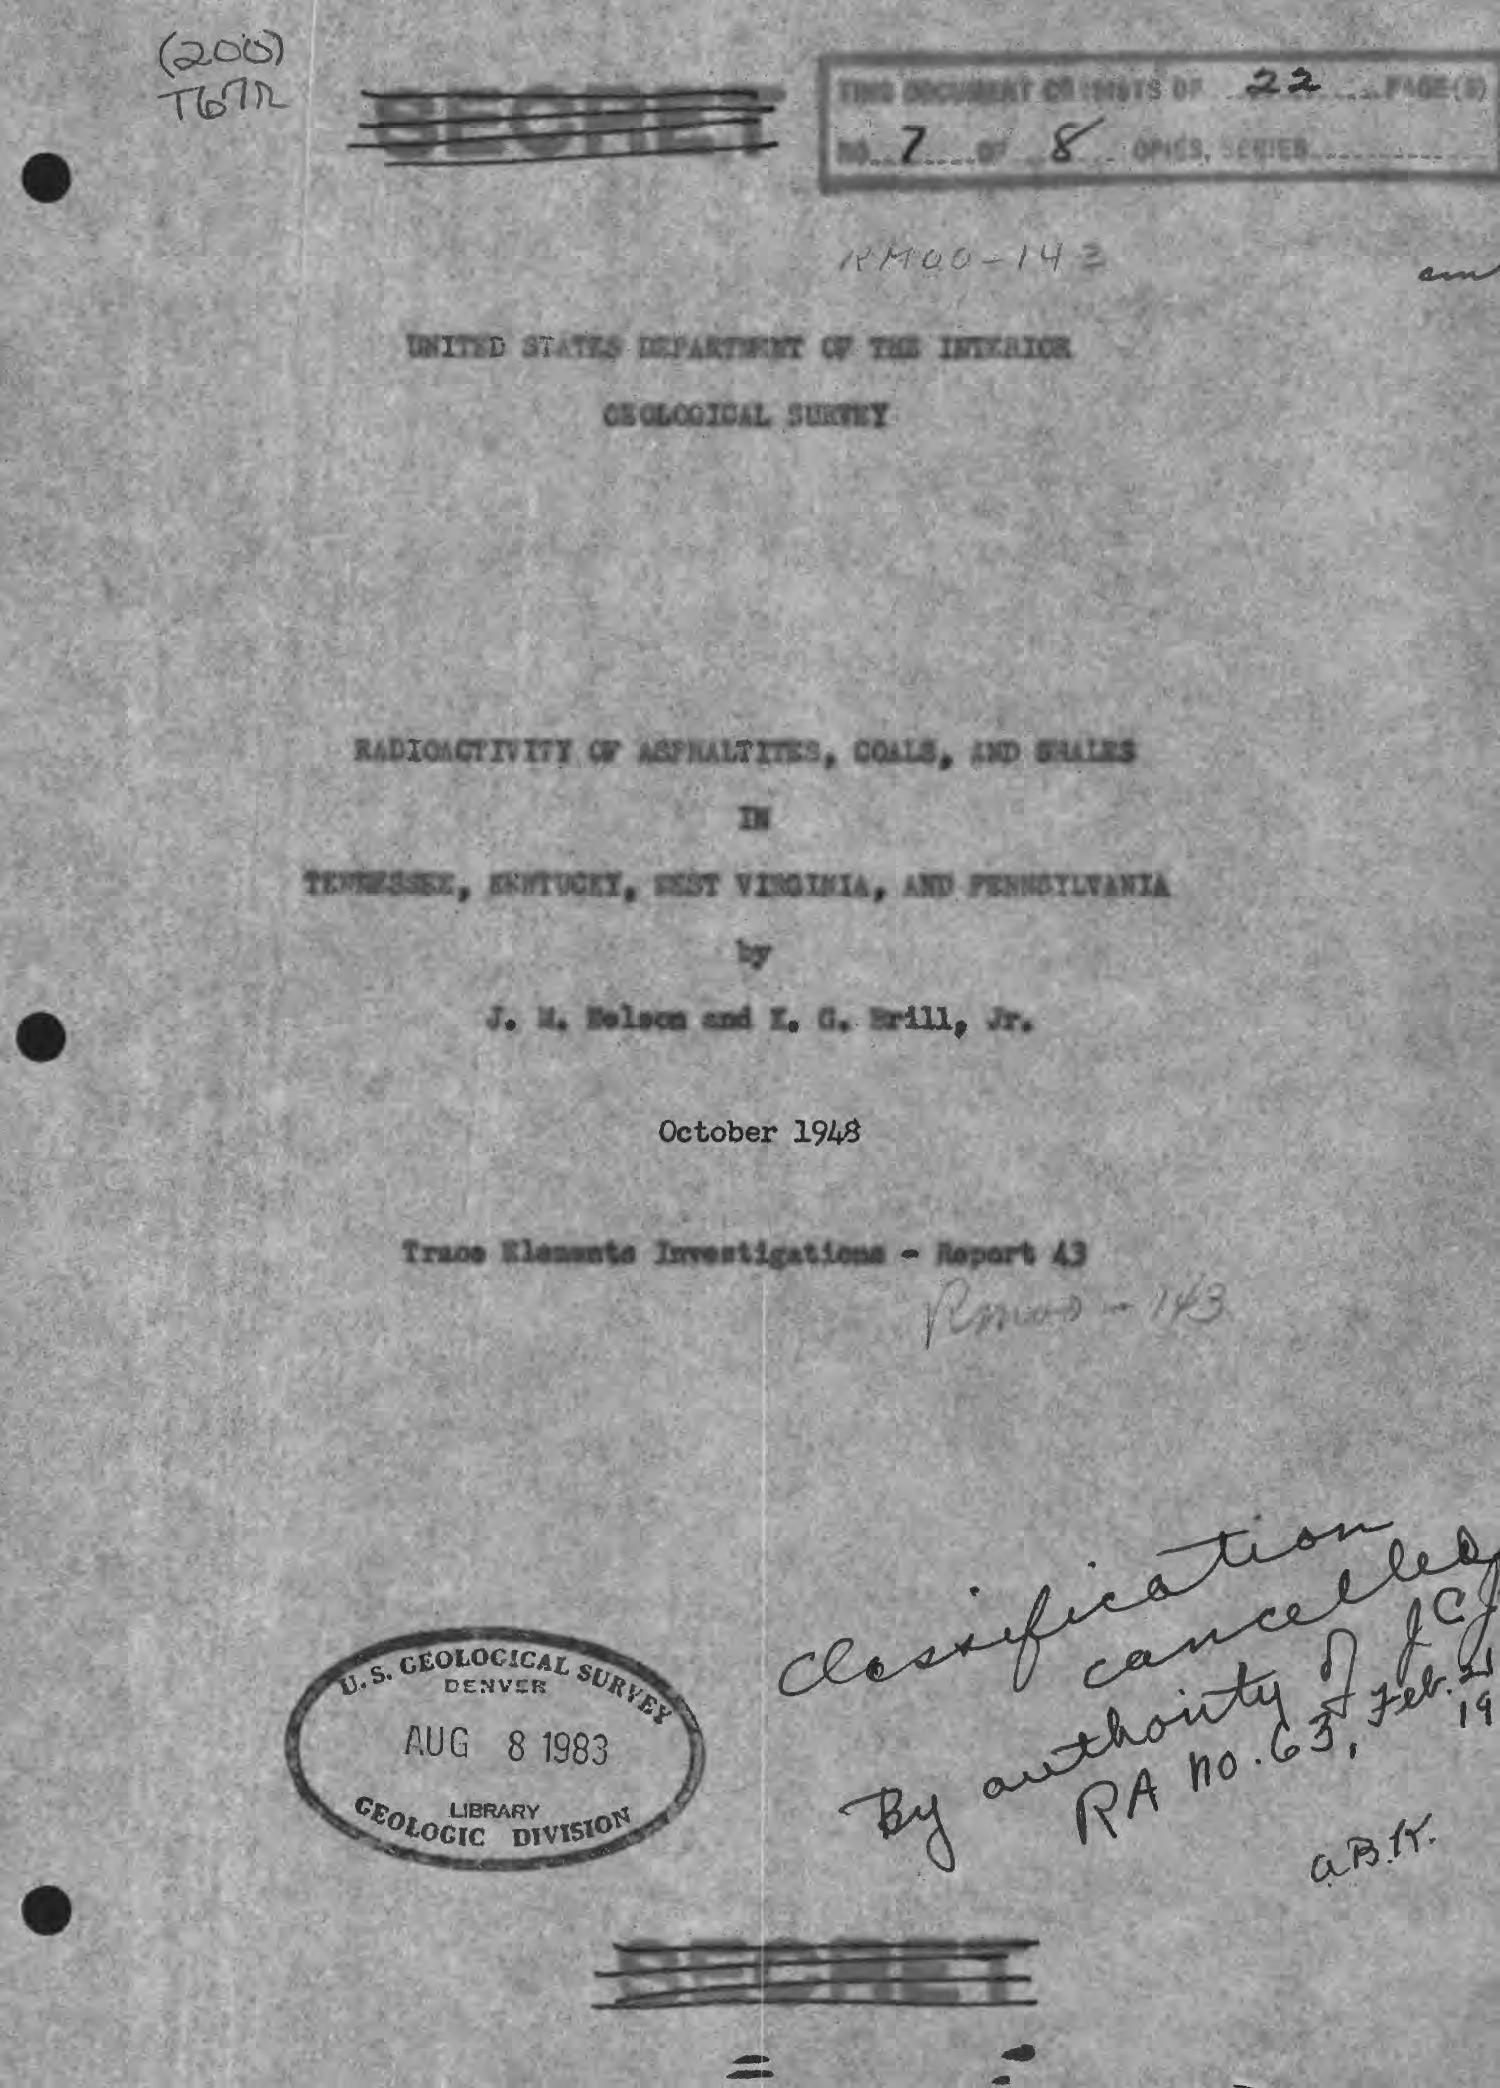 Radioactivity of Asphaltites, Coals, and Shales in Tennessee, Kentucky, West Virginia, and Pennsylvania
                                                
                                                    Title Page
                                                